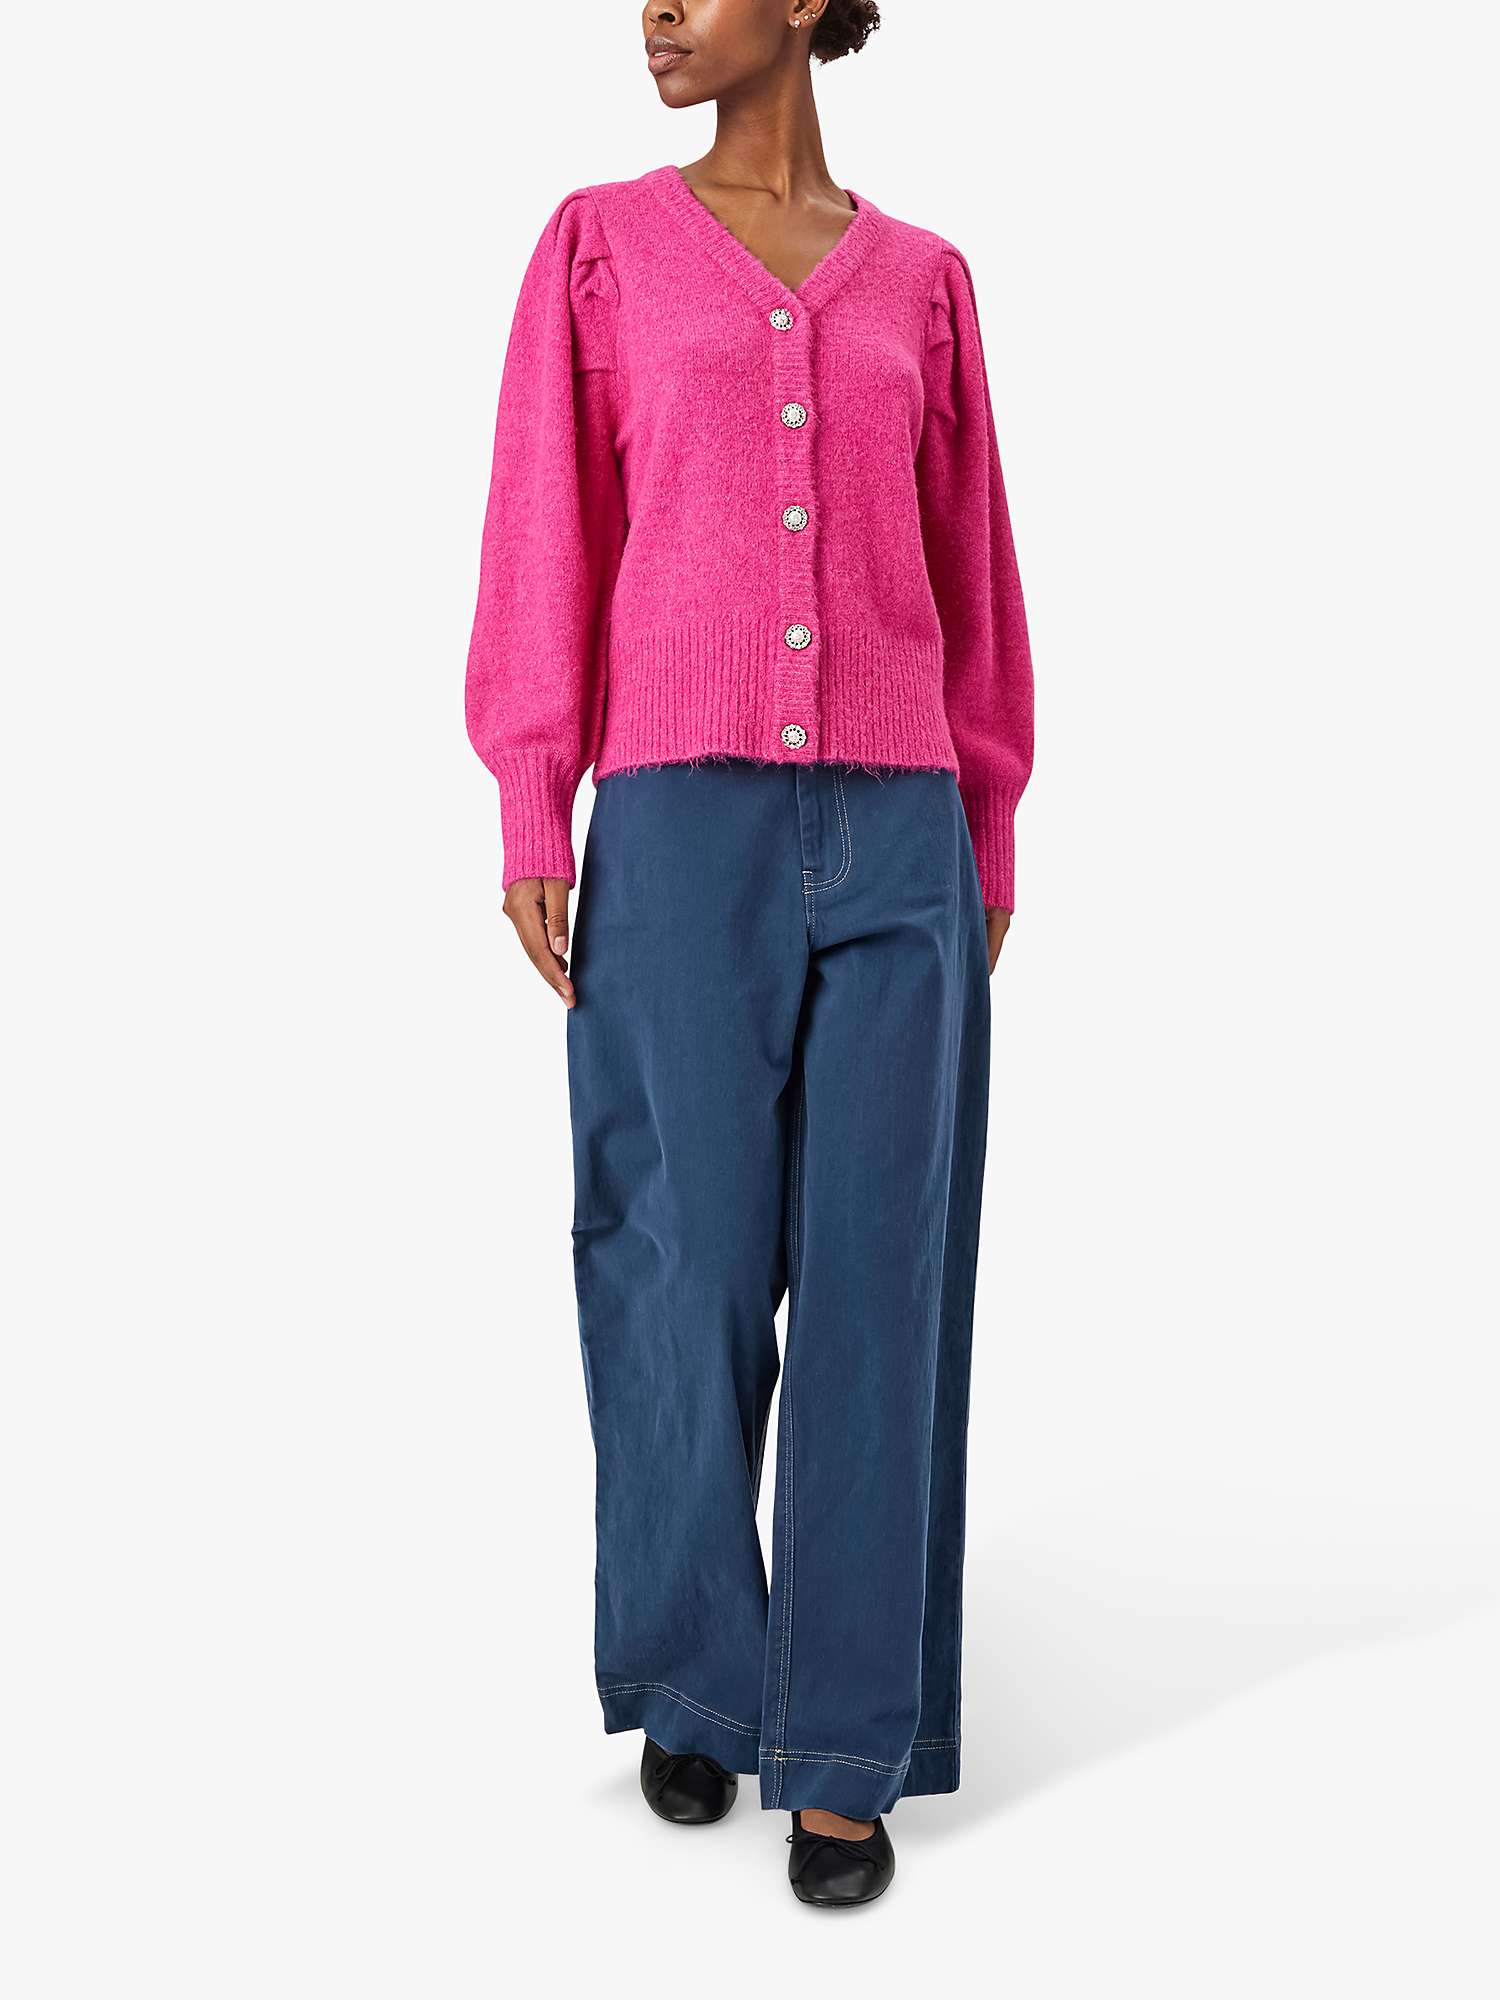 Lollys Laundry Laura V-Neck Cardigan, Pink at John Lewis & Partners